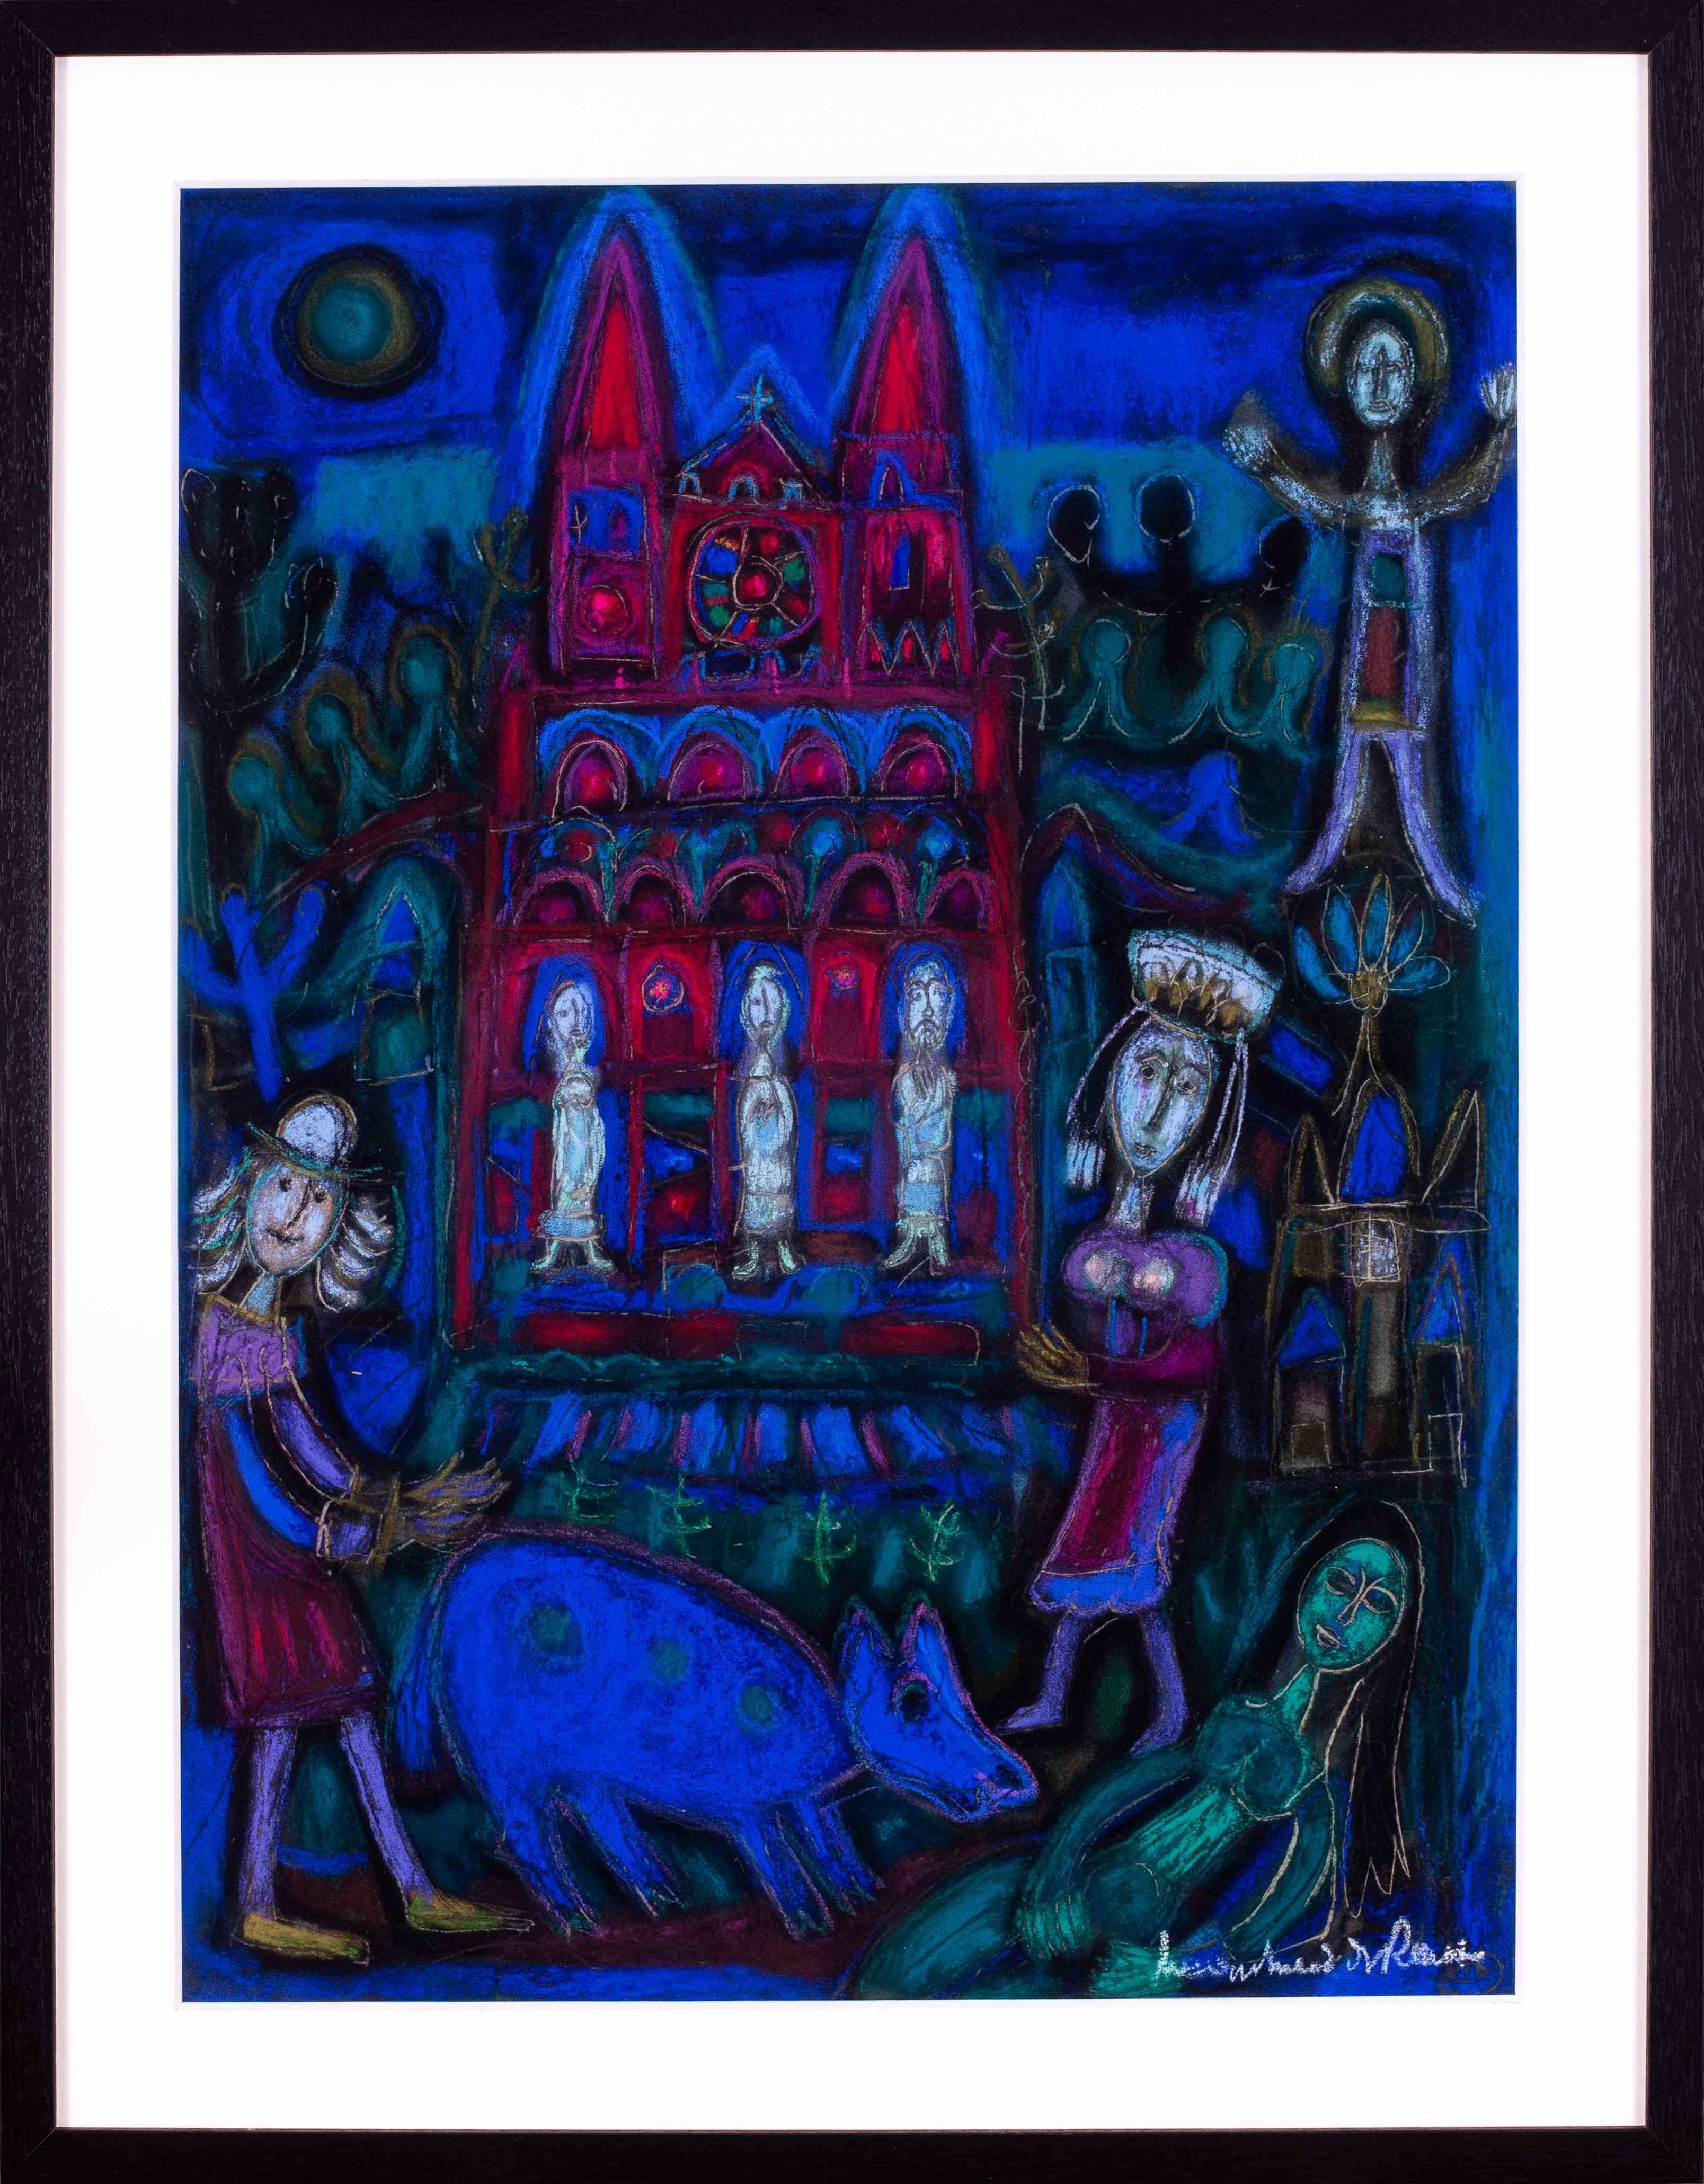 Louis Marchand des Raux Animal Art - French Surrealist pastel drawing  'In front of the church' by Marchand des Raux